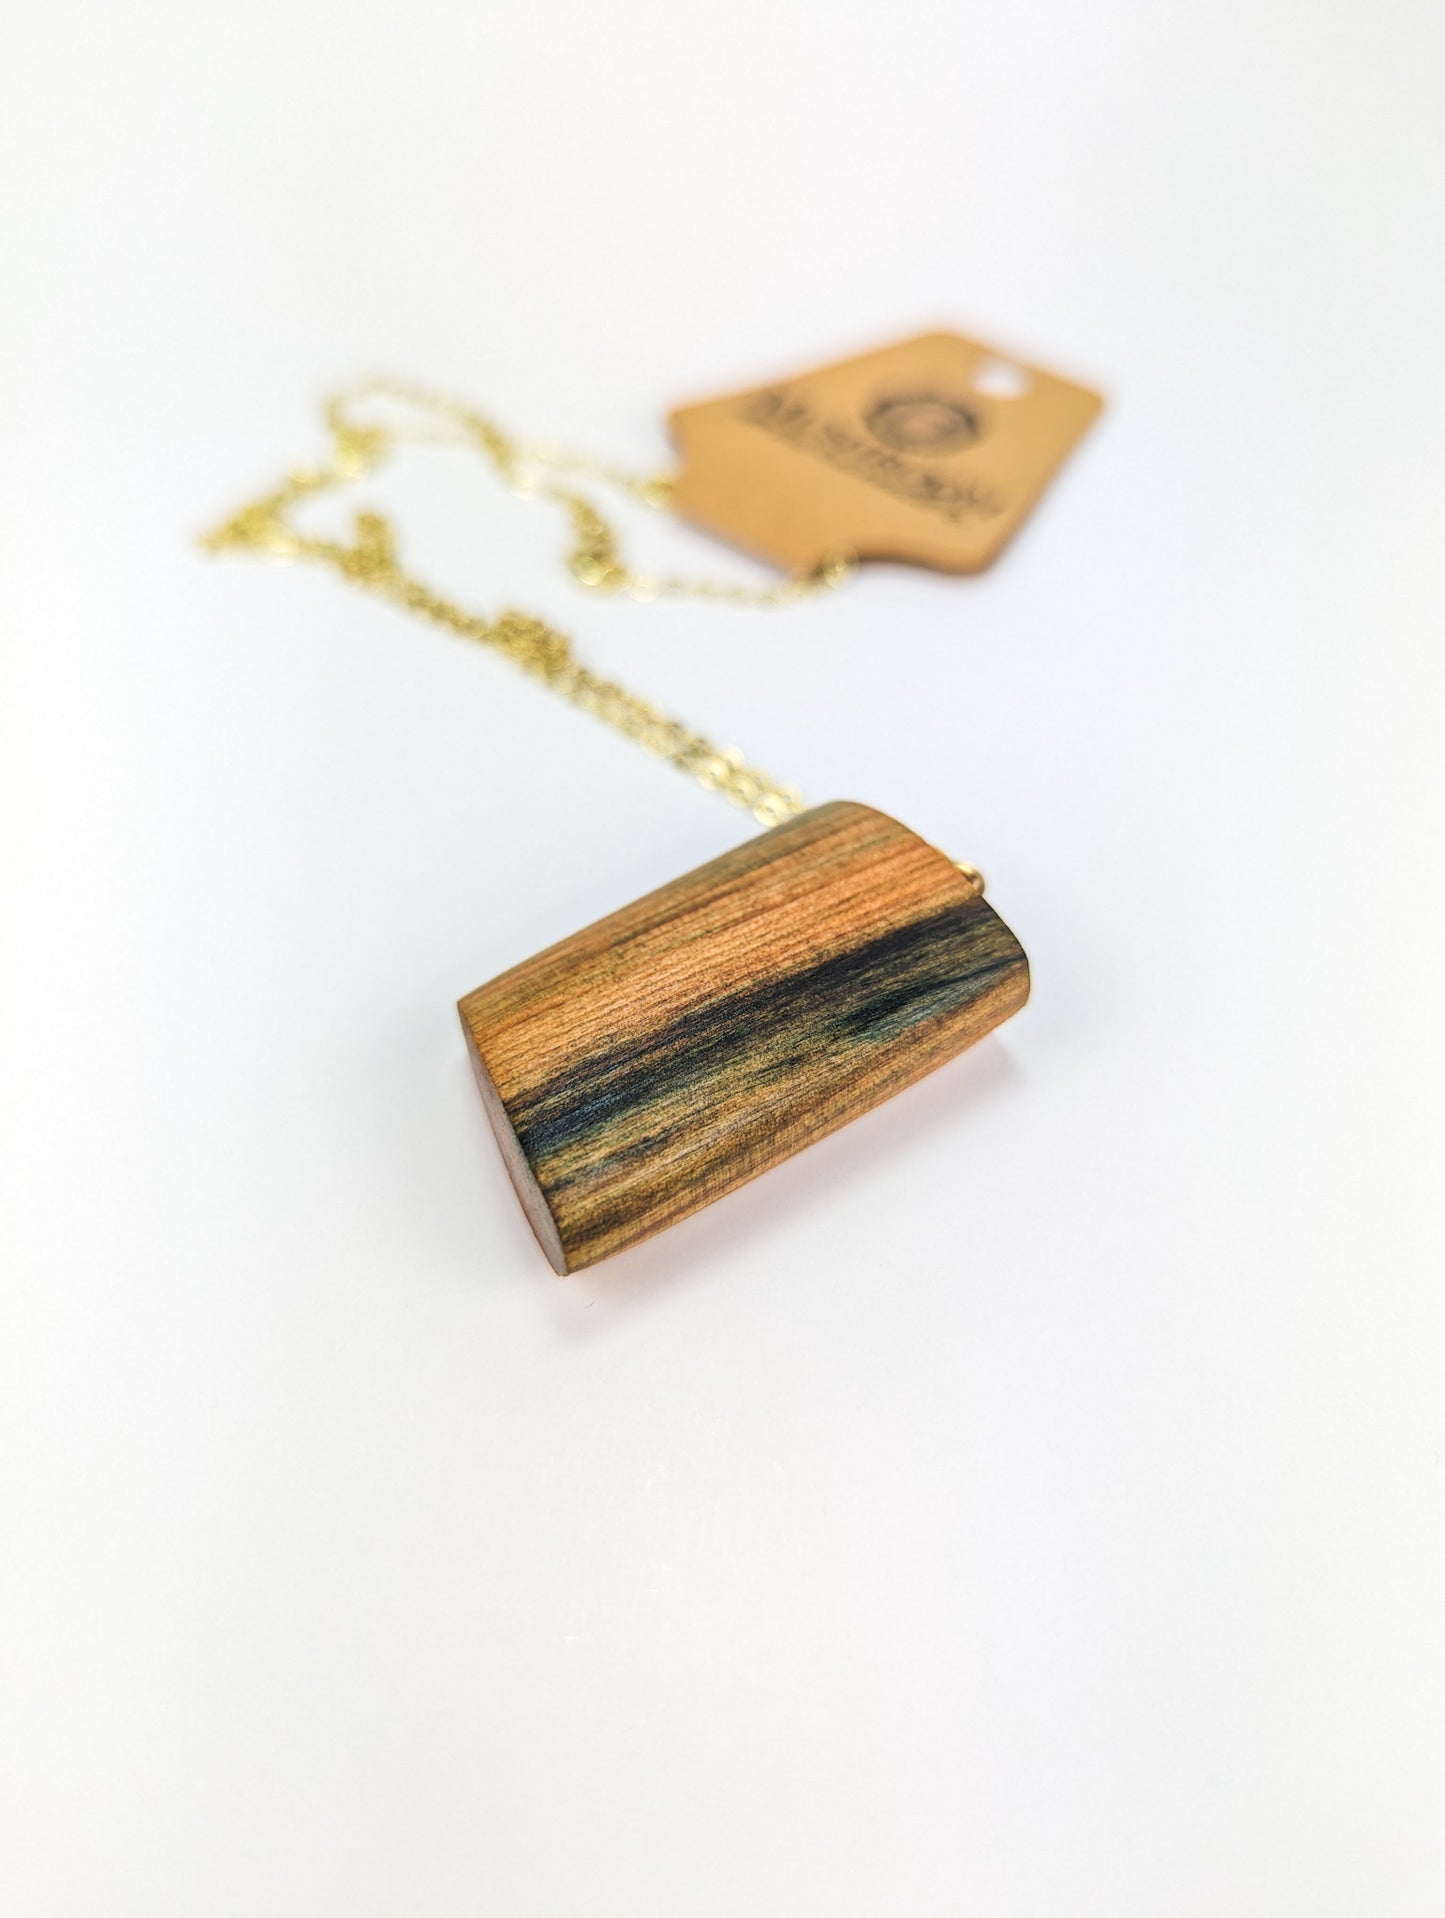 Naturally Fungus-Stained Wooden Pendant w/Black Spalting